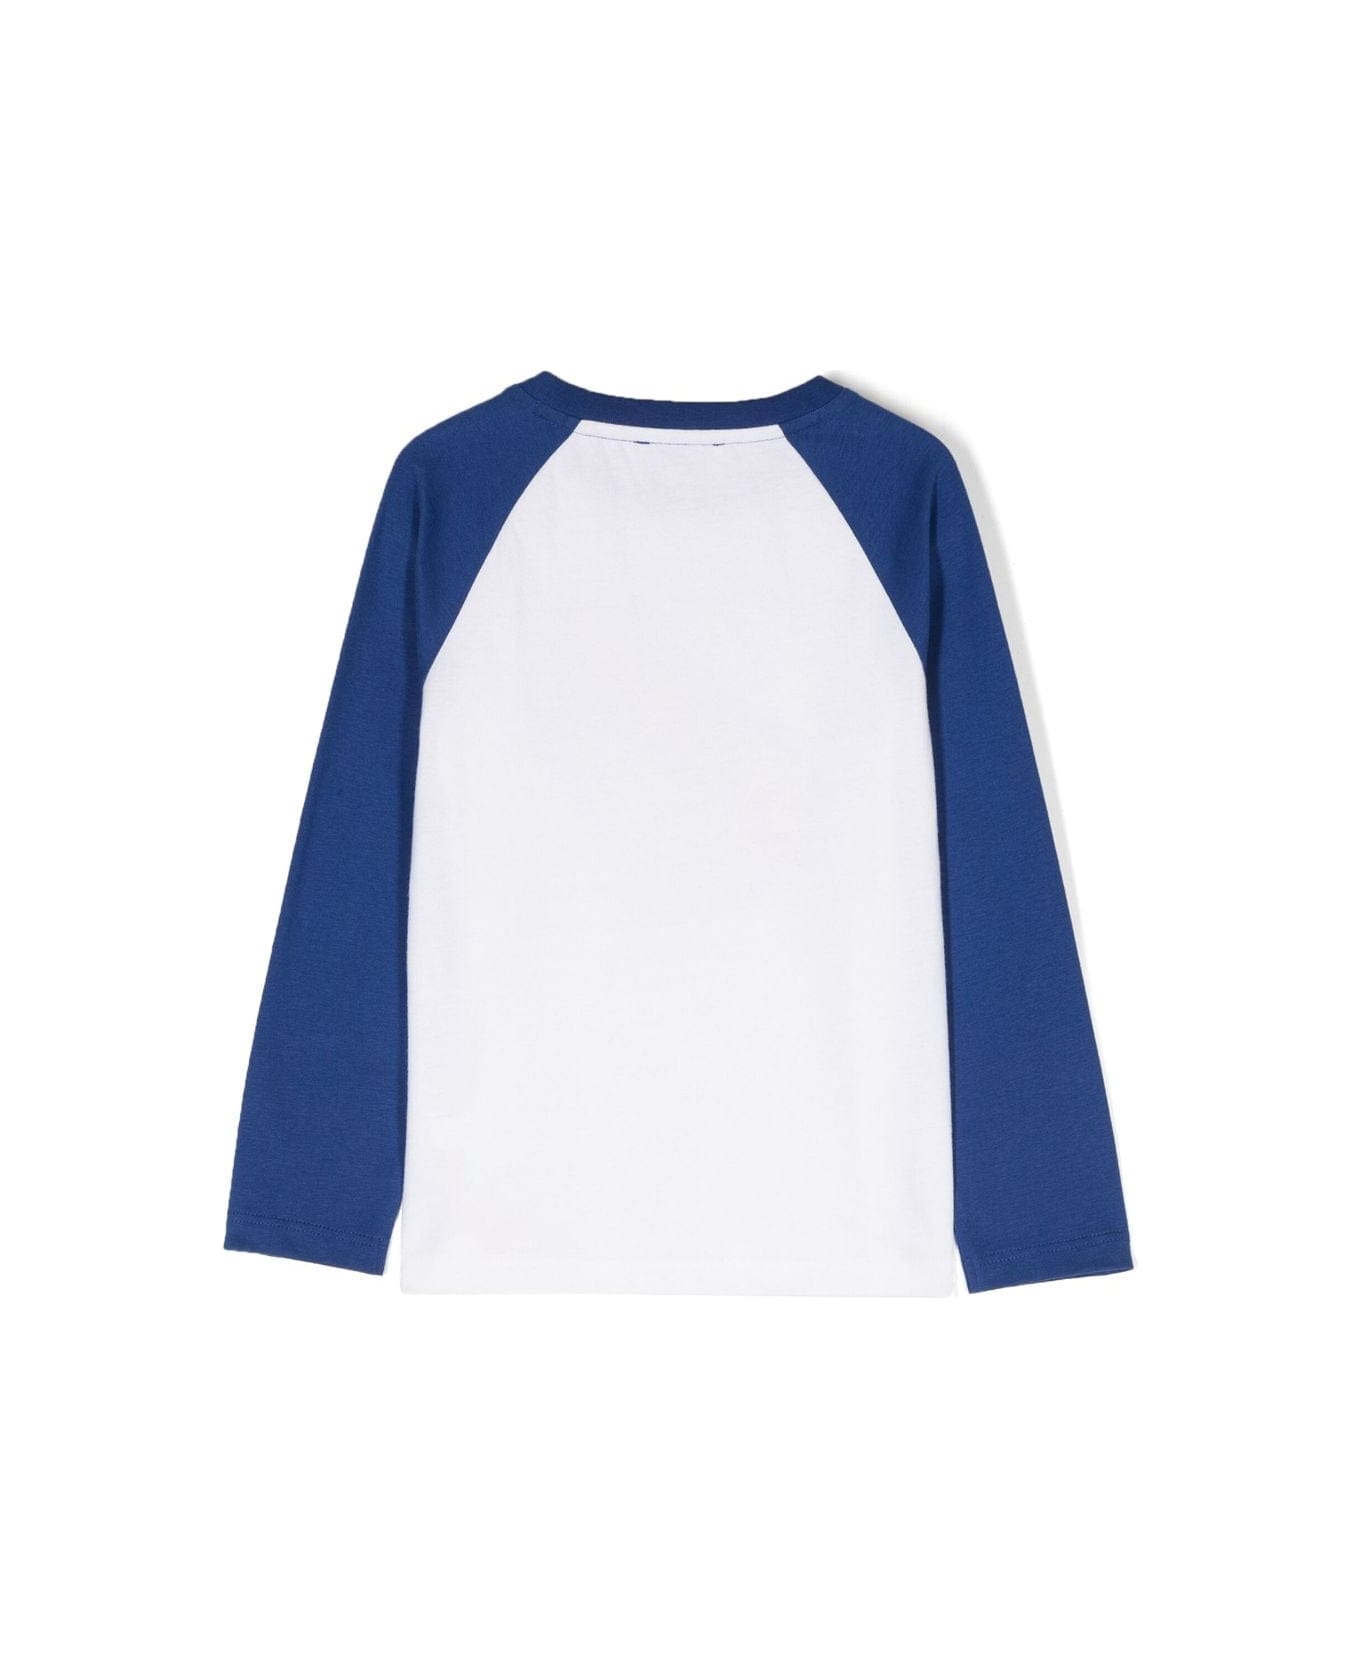 Little Marc Jacobs Marc Jacobs T-shirt Bianca Con Pannelli A Contrasto In Jersey Di Cotone Bambino - Bianco